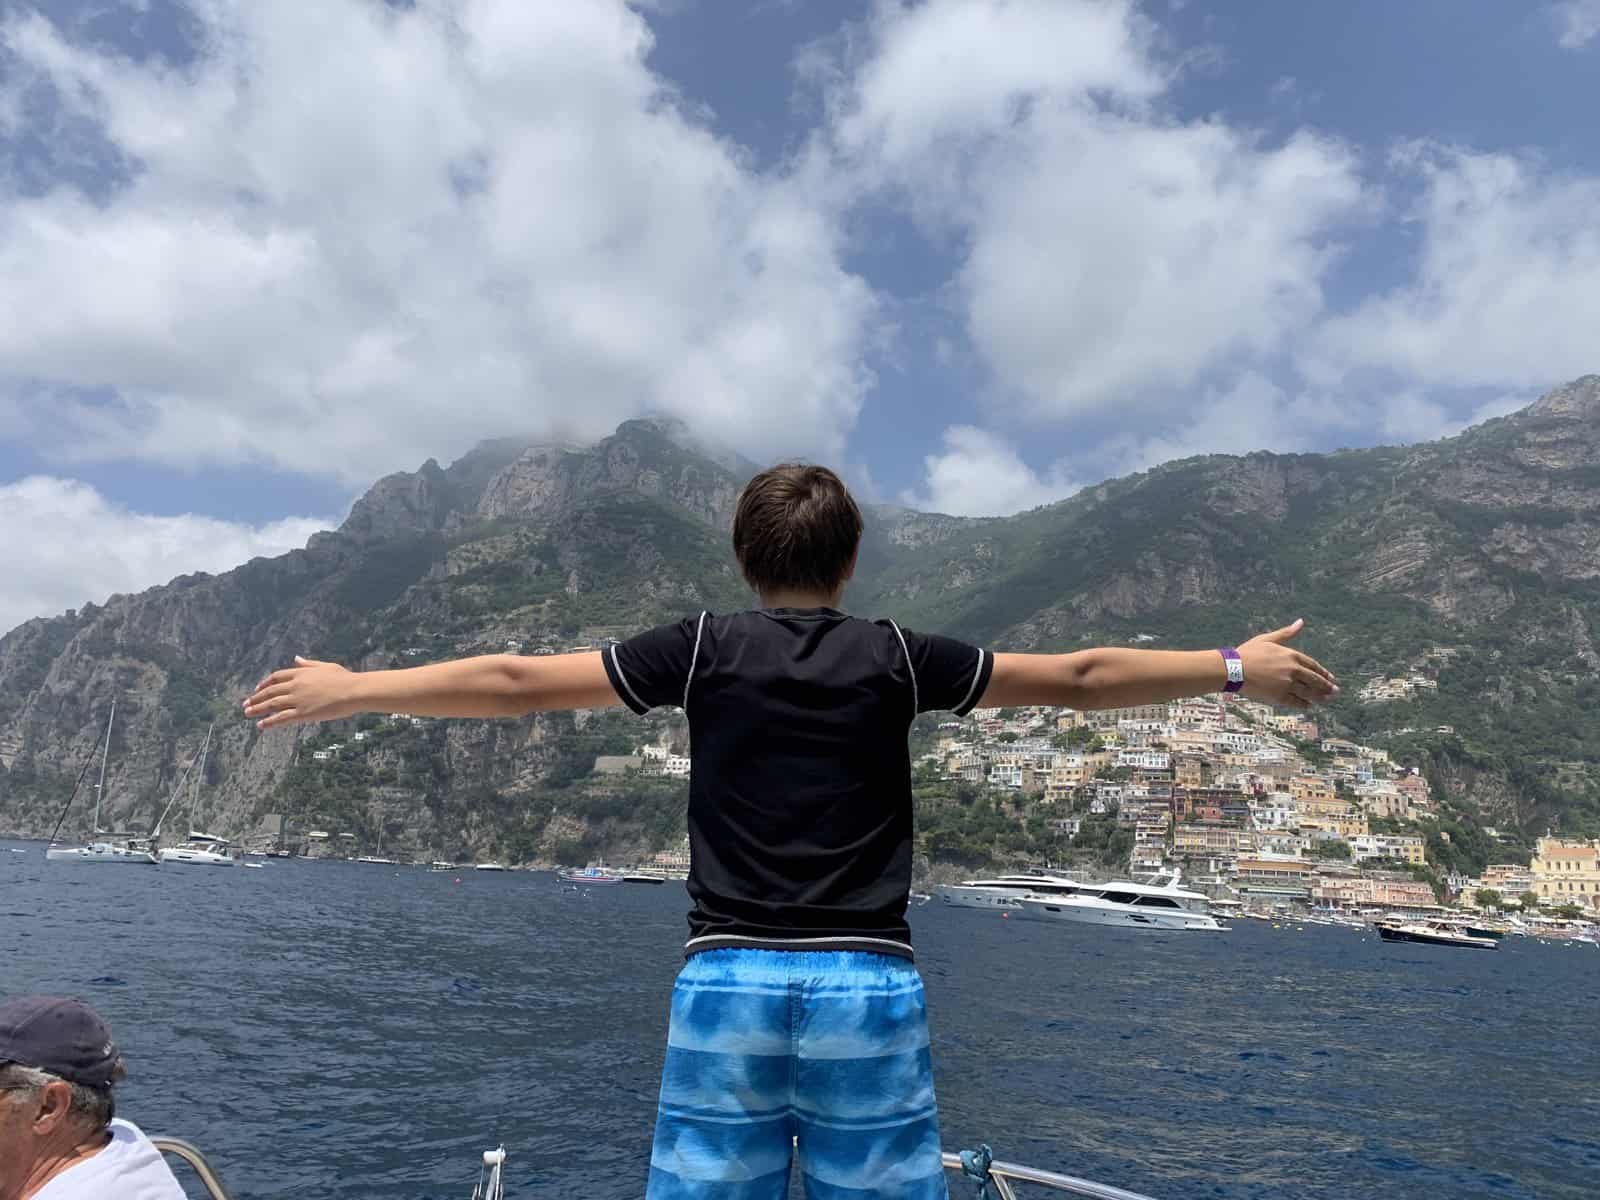 CJ arms wide (titanic-style) at the bow of the boat overlooking the Amalfi Coast